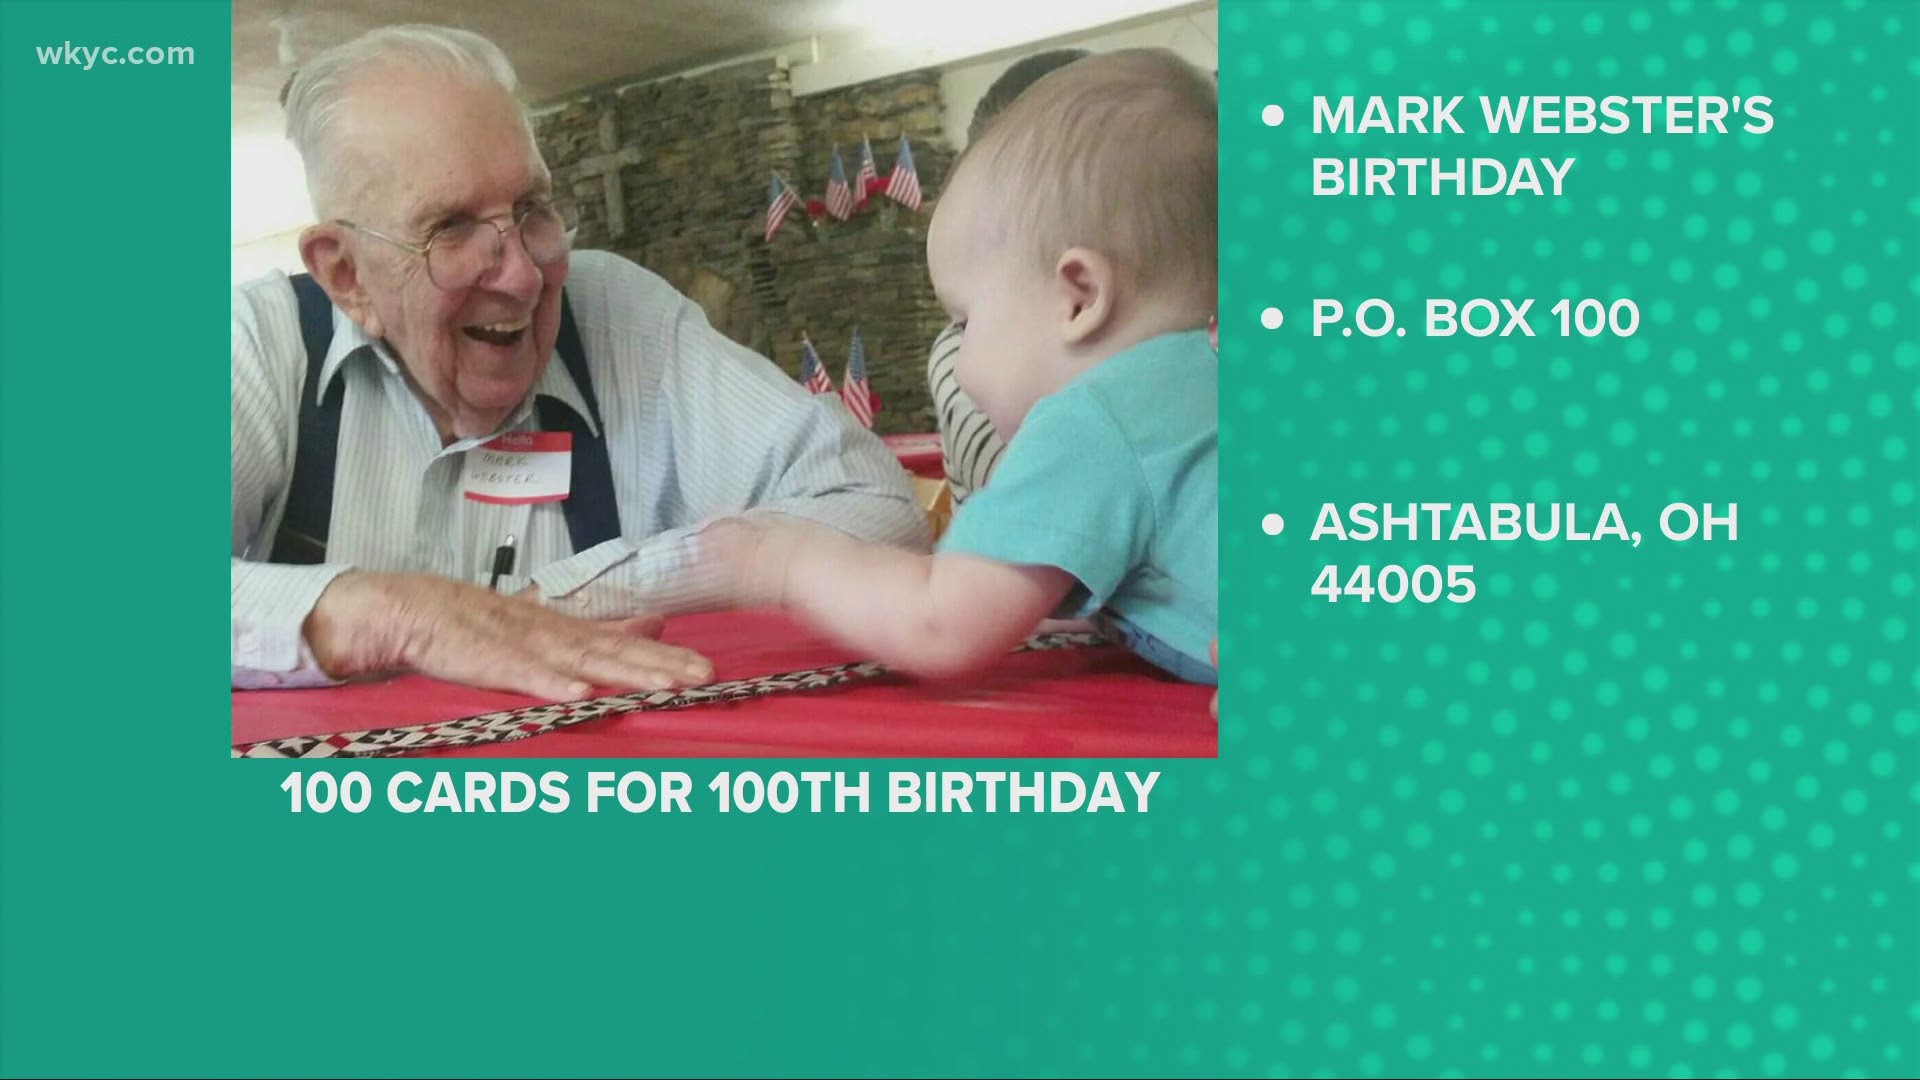 You can help make a life-long Grand River man's birthday wish come true.  Mark Webster turns 100 on August 30th and his family is trying to get him 100 cards.